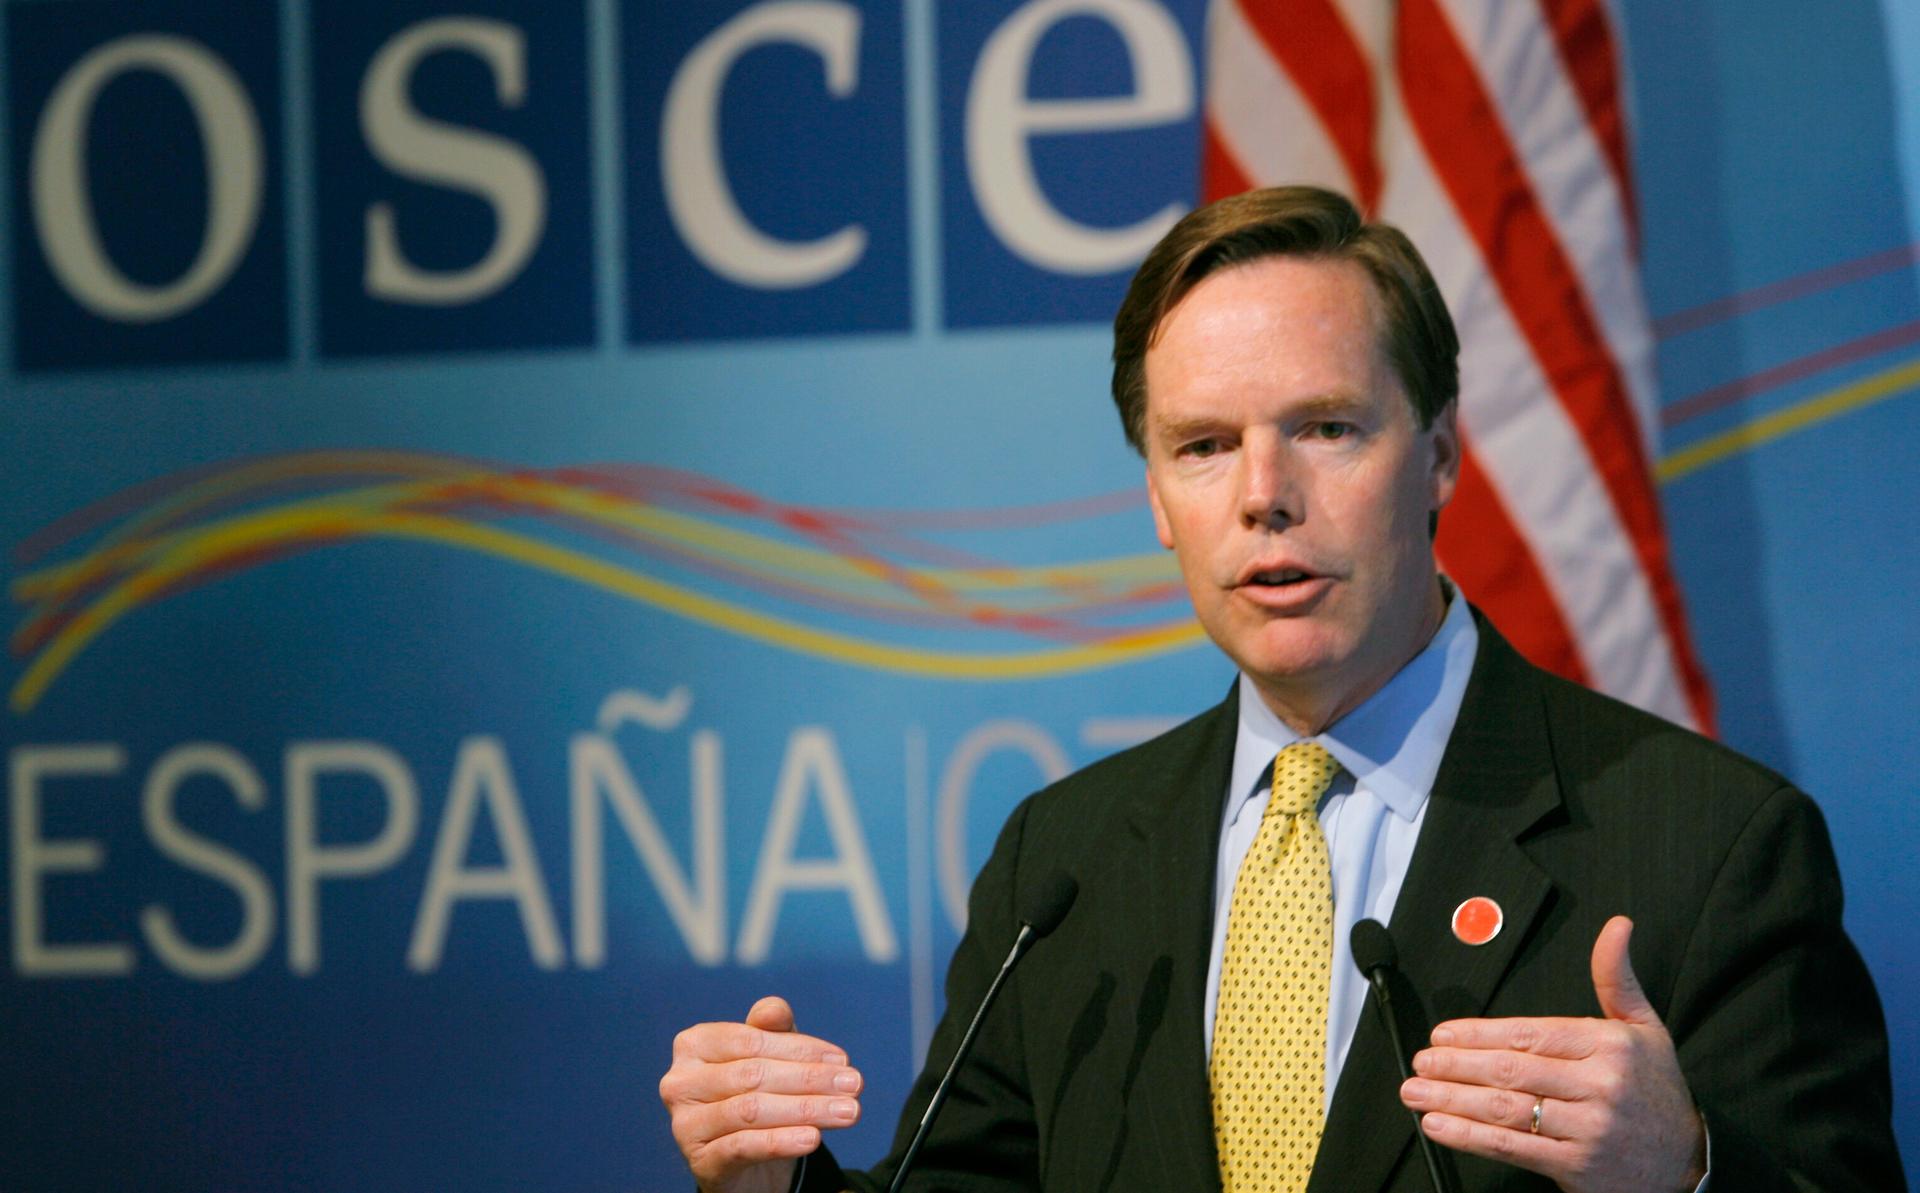 Nicholas Burns, then US Undersecretary for Political Affairs, gestures during a news conference at the end of the Organization for Security and Co-operation in Europe (OSCE) ministerial meeting in Madrid, on November 30, 2007.